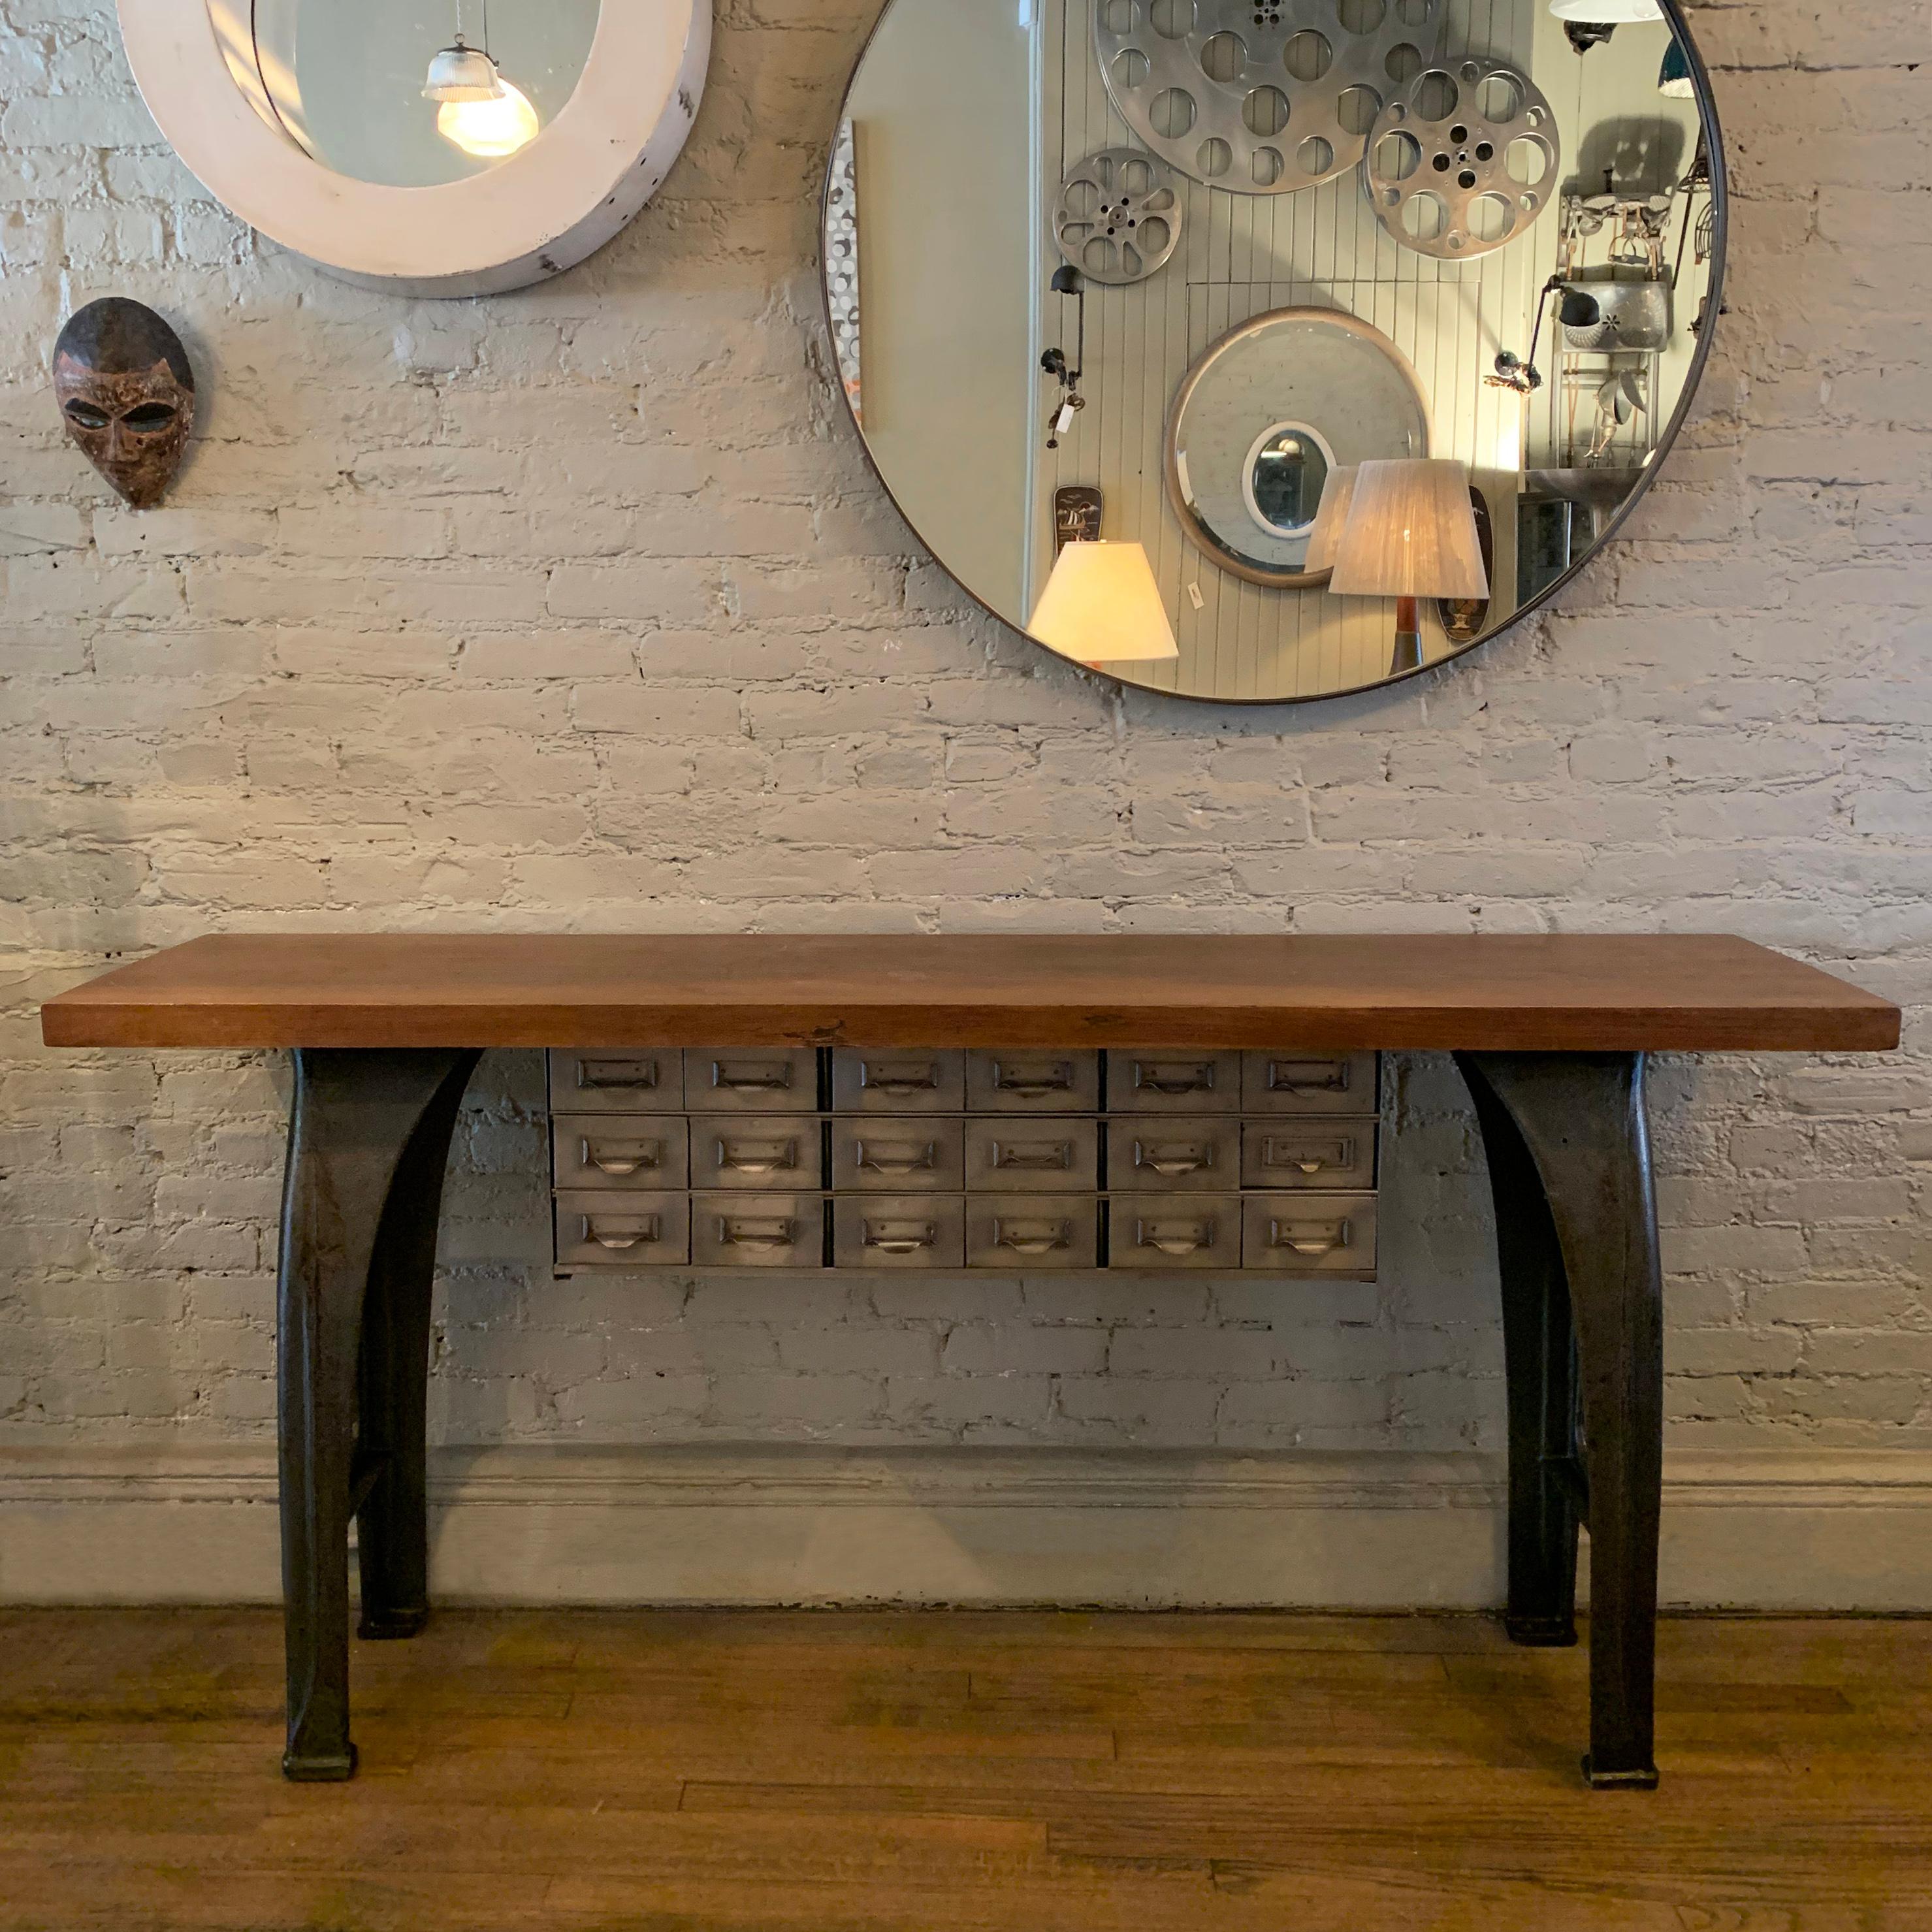 Custom, industrial, console table features cast iron legs and reclaimed, maple block top with steel index cabinet storage. The 18 steel drawer section measures 33.75 W x 11 D x 34 H and each drawer is 5.5 W x 11 D x 3 H.